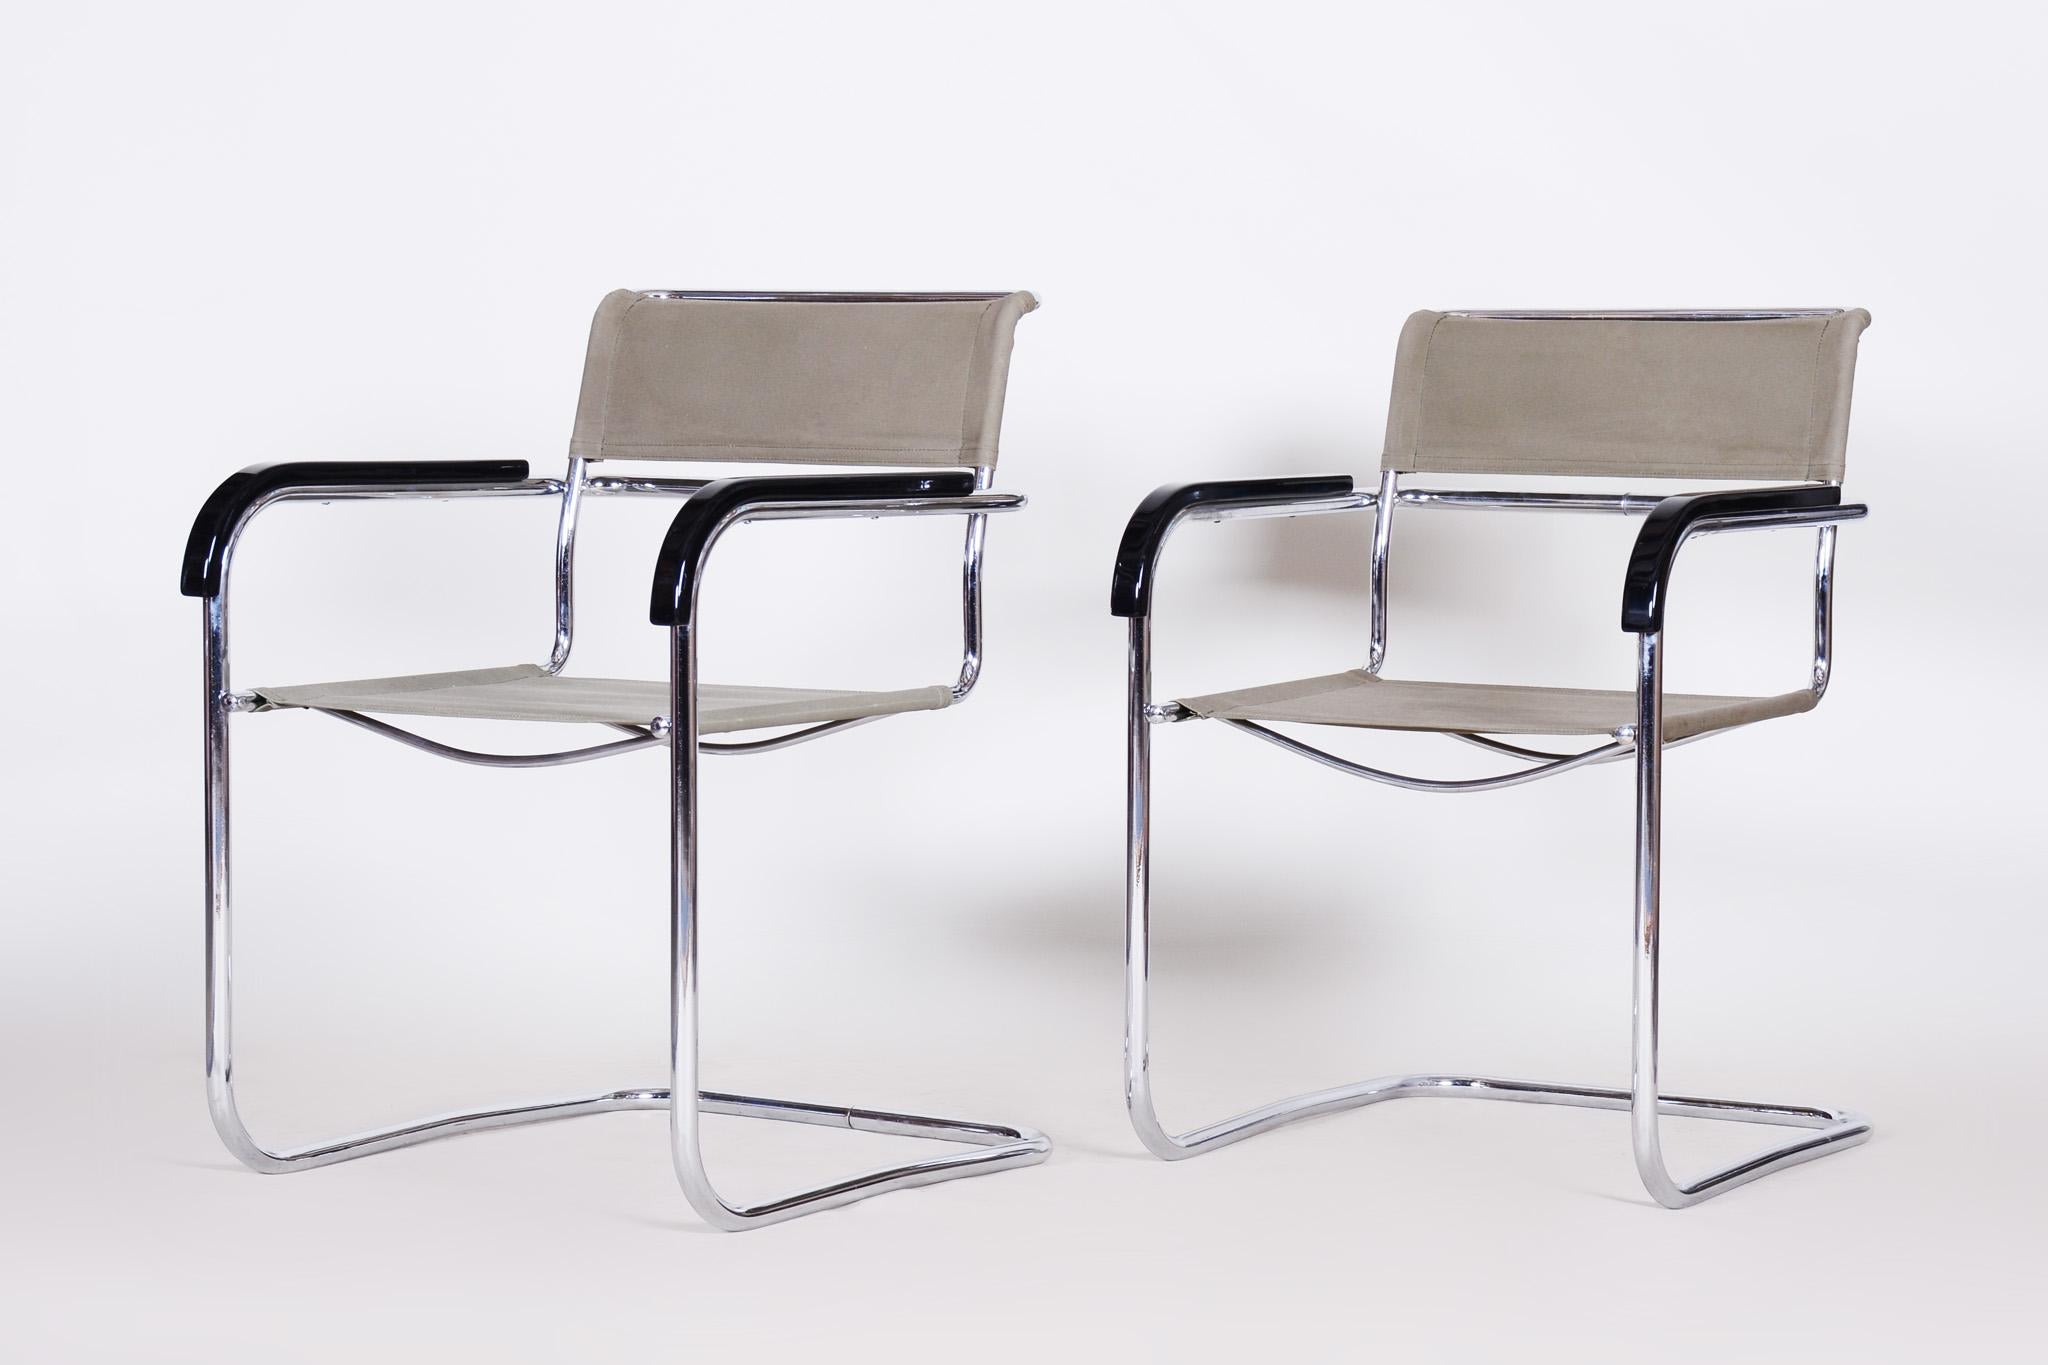 Pair of Czech Bauhaus Armchairs, Marcel Breuer and Thonet, Chrome, Fabric, 1930s For Sale 5